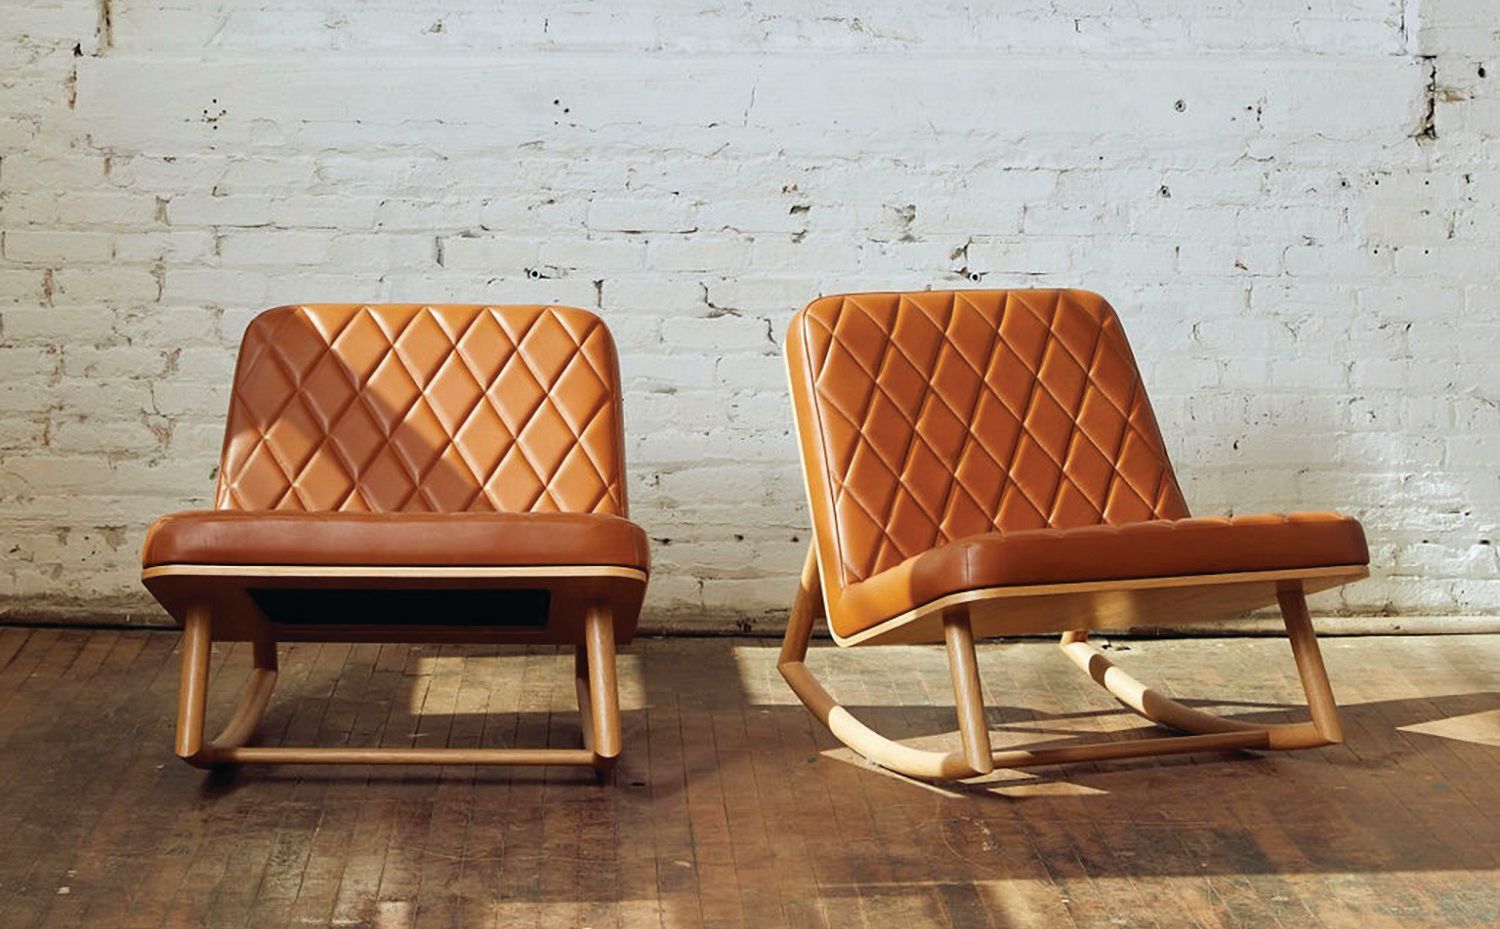 A pair of Lagomorph Design’s Rokka rockers PHOTO COURTESY OF THE CHICAGO ARCHITECTURE CENTER